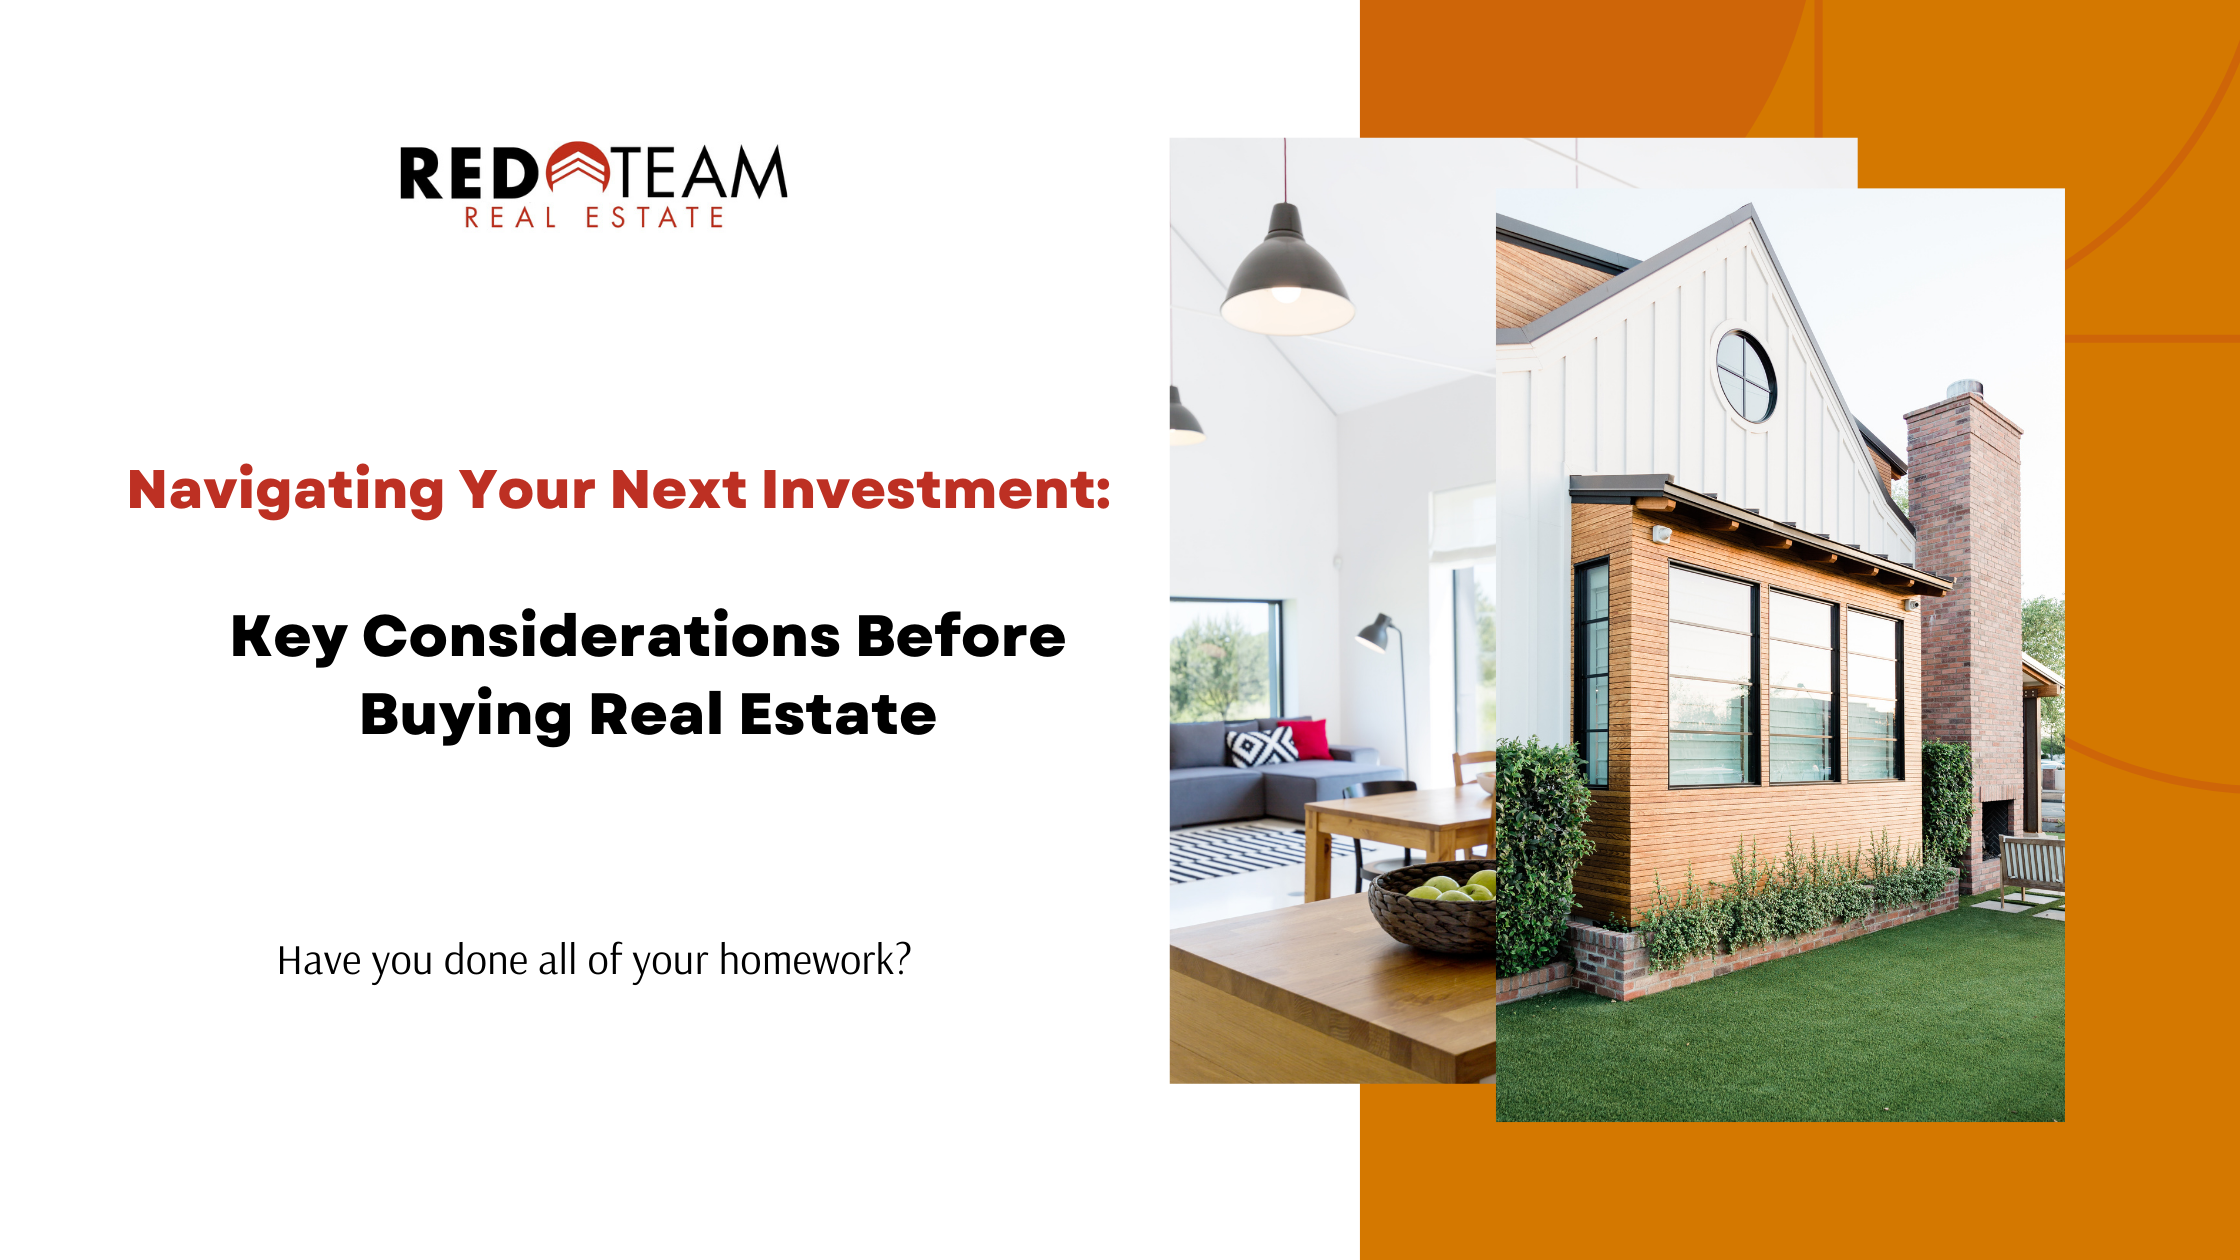 Navigating Your Next Investment: Key Considerations Before Buying Real Estate.